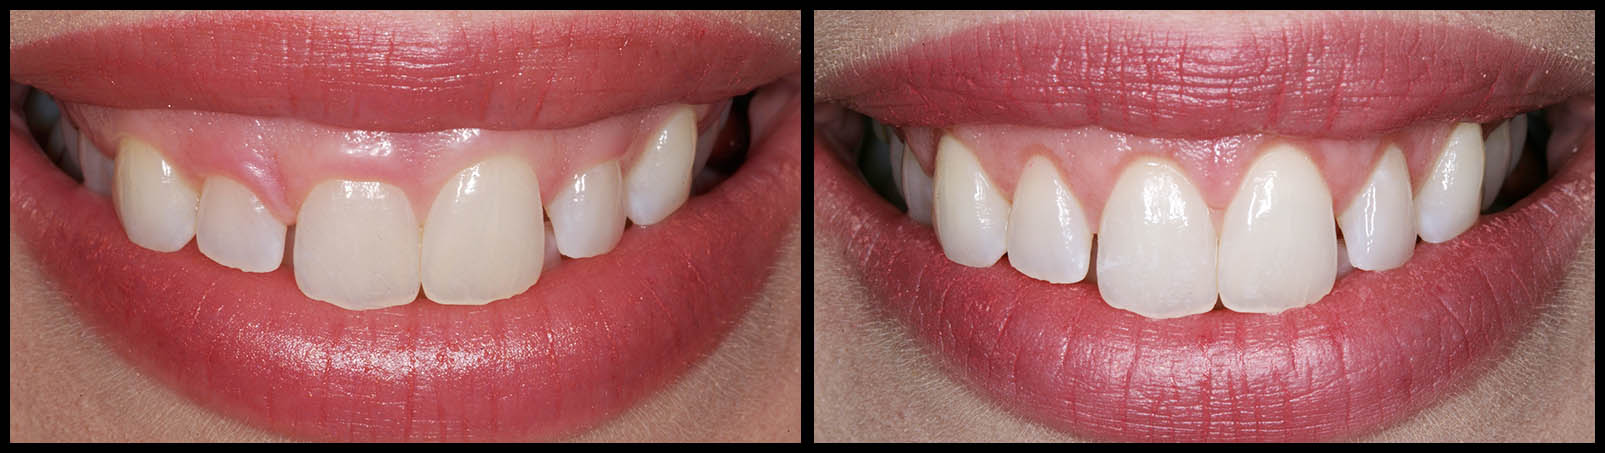 Gum Lift - Before and After bunker hill dentistry